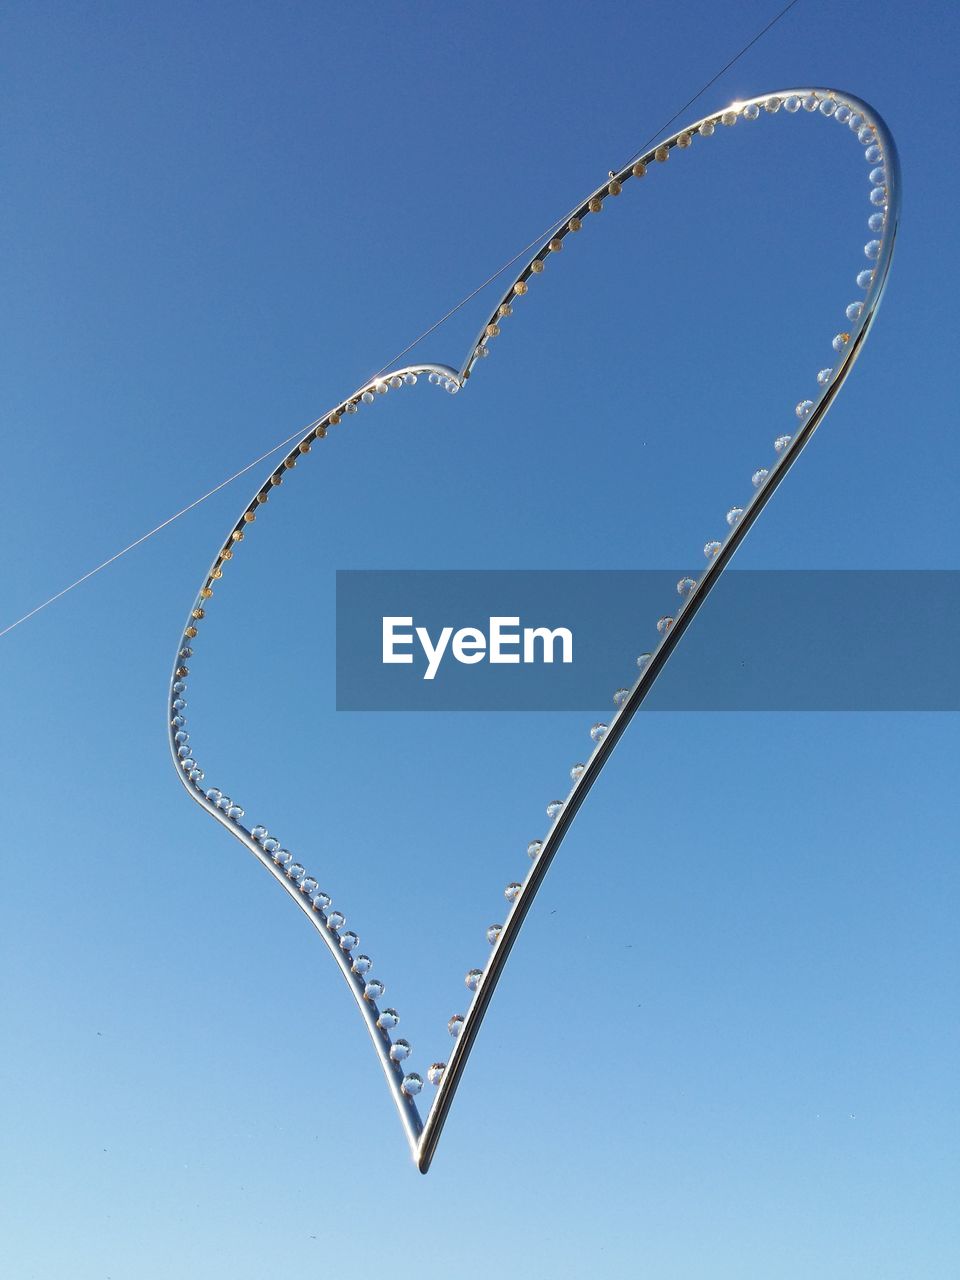 Low angle view of heart shape string light hanging against clear sky on sunny day